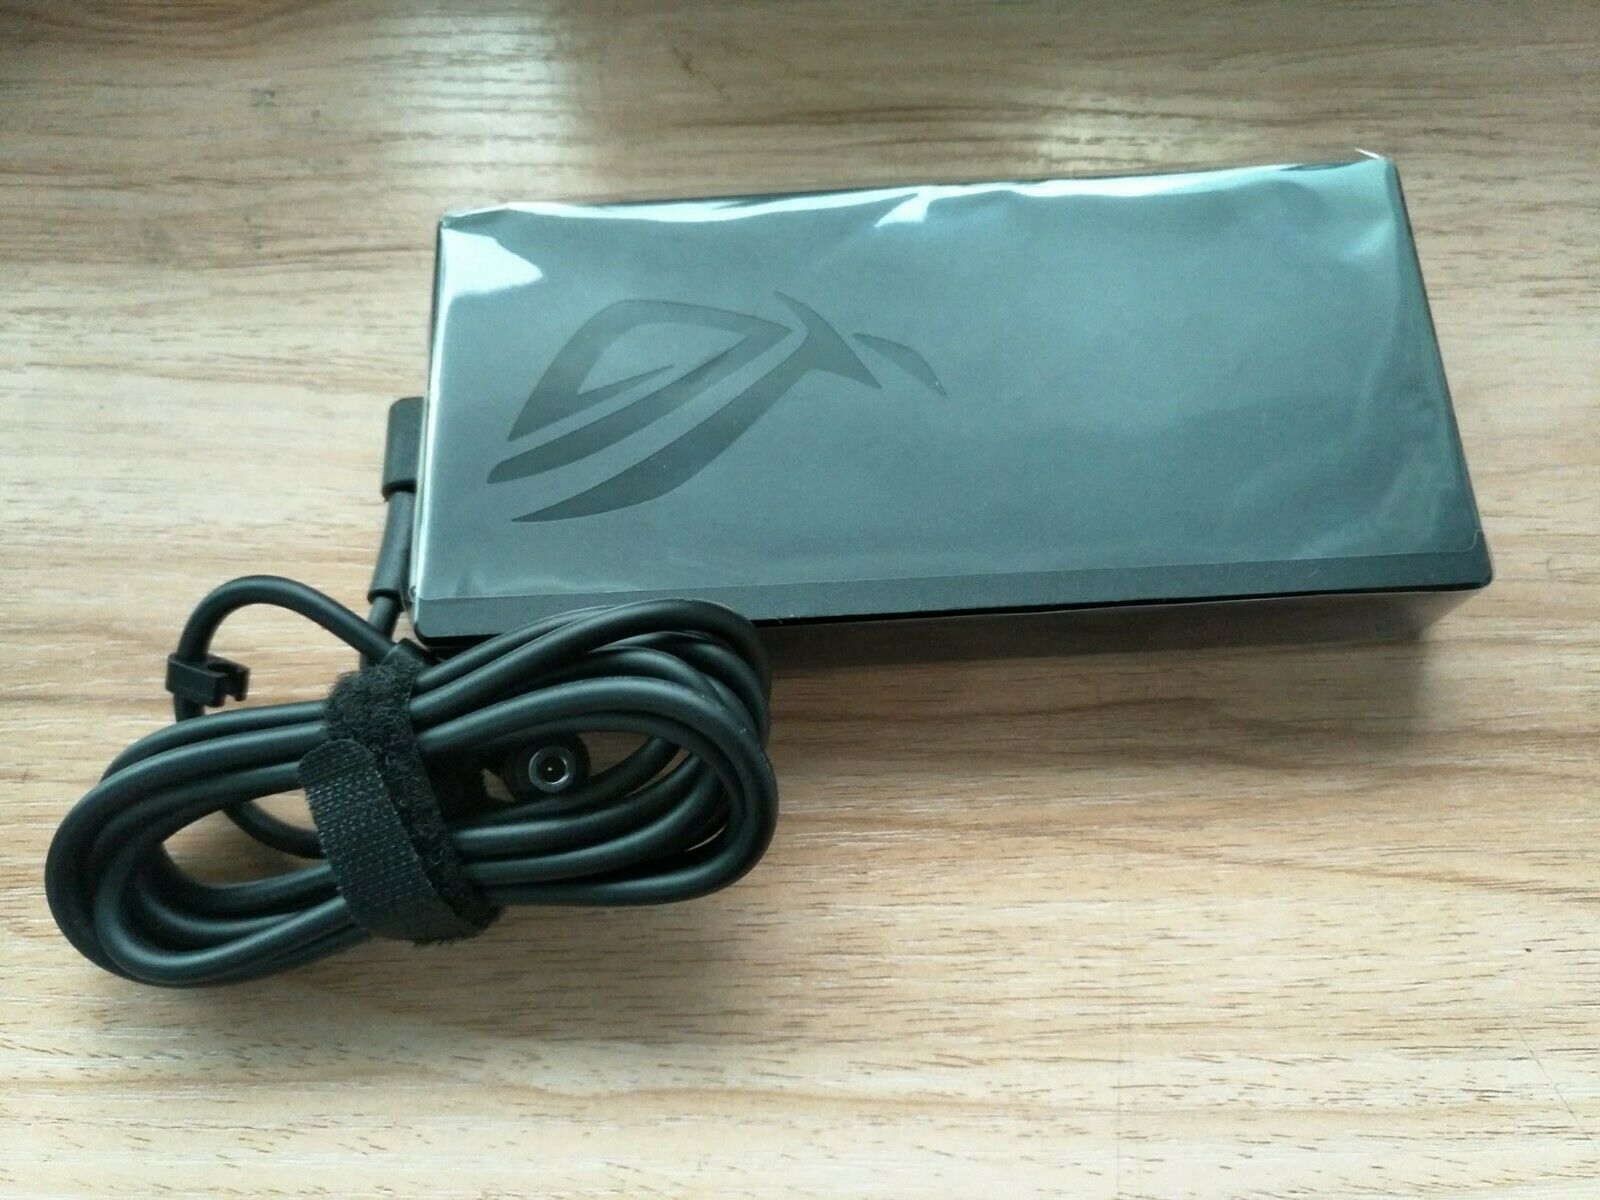 Original ASUS 20V 9A AC Adapter for ROG Zephyrus G14 GA401IU-HE002T ADP-180TB H@ Country/Region of Manufacture: China